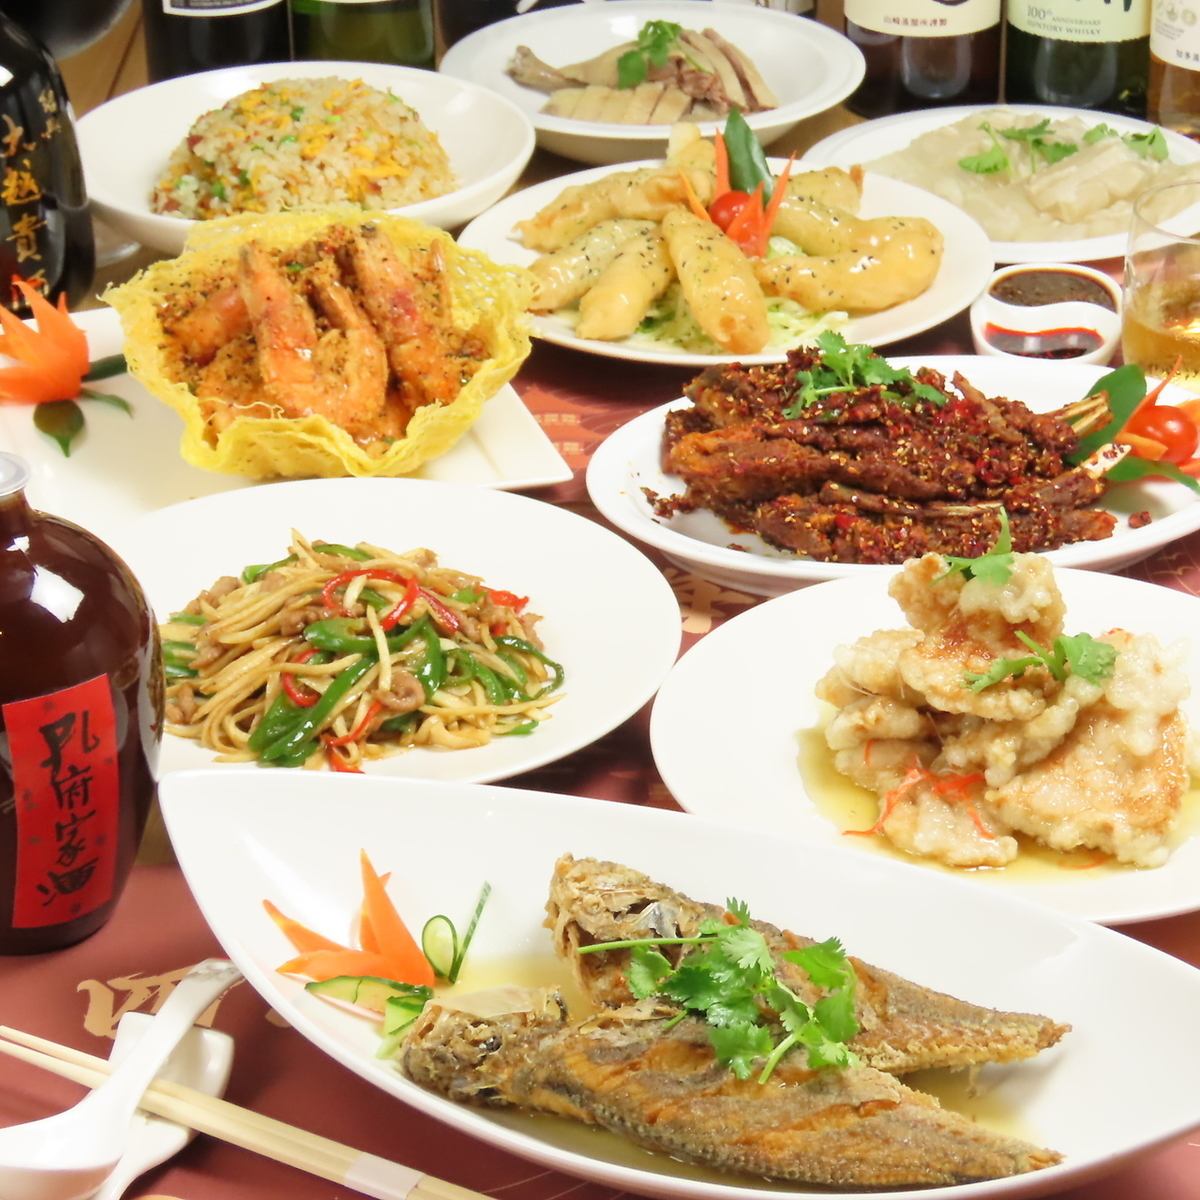 Enjoy alcohol that goes perfectly with Chinese food from lunch!We have a wide variety of drinks available.